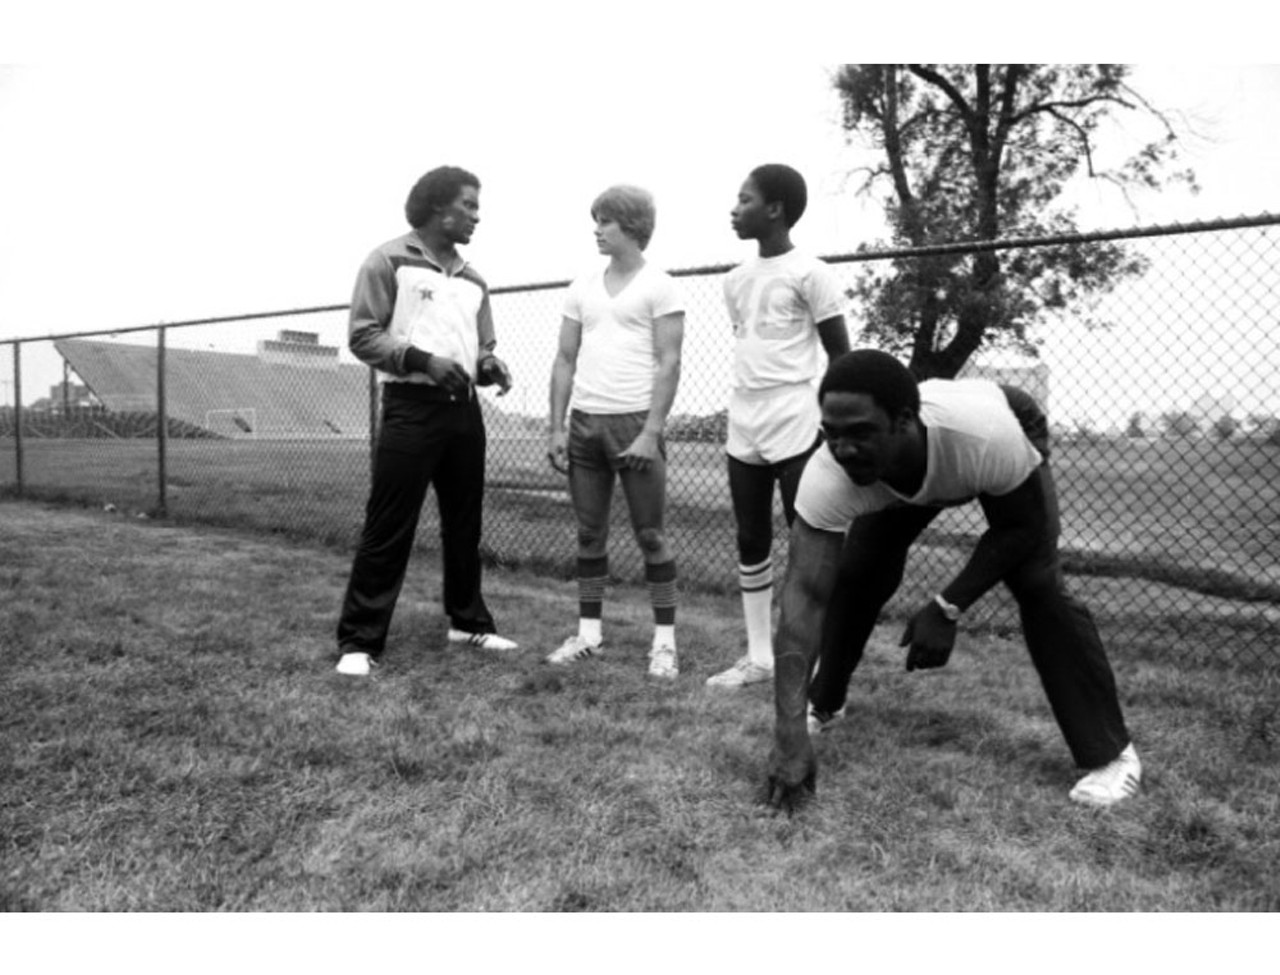 Billy Simms in 1981 teaching at a kids camp.